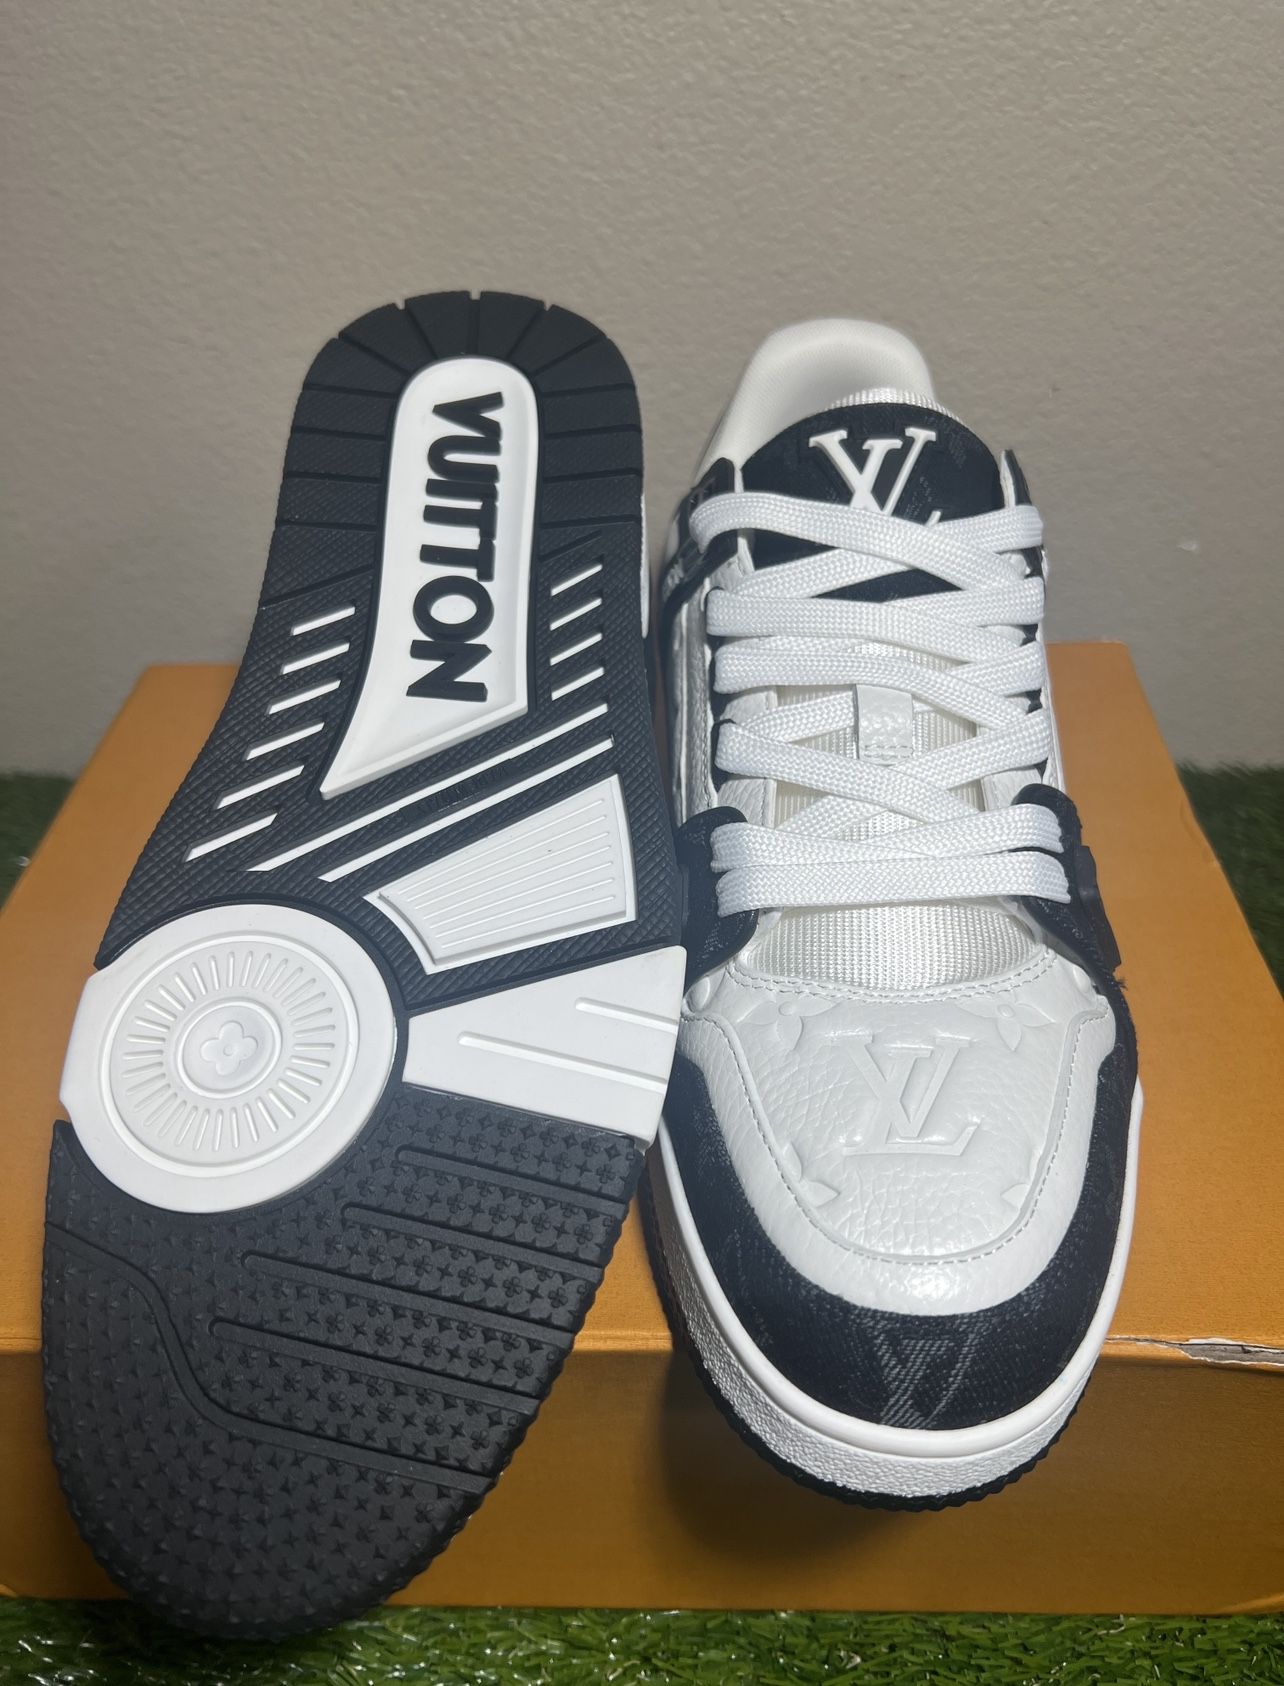 Louis Vuitton Trainer Black White Denim Monogram Embossed Leather Sneakers  LV8 US9-9.5 for Sale in Diamond Bar, CA - OfferUp